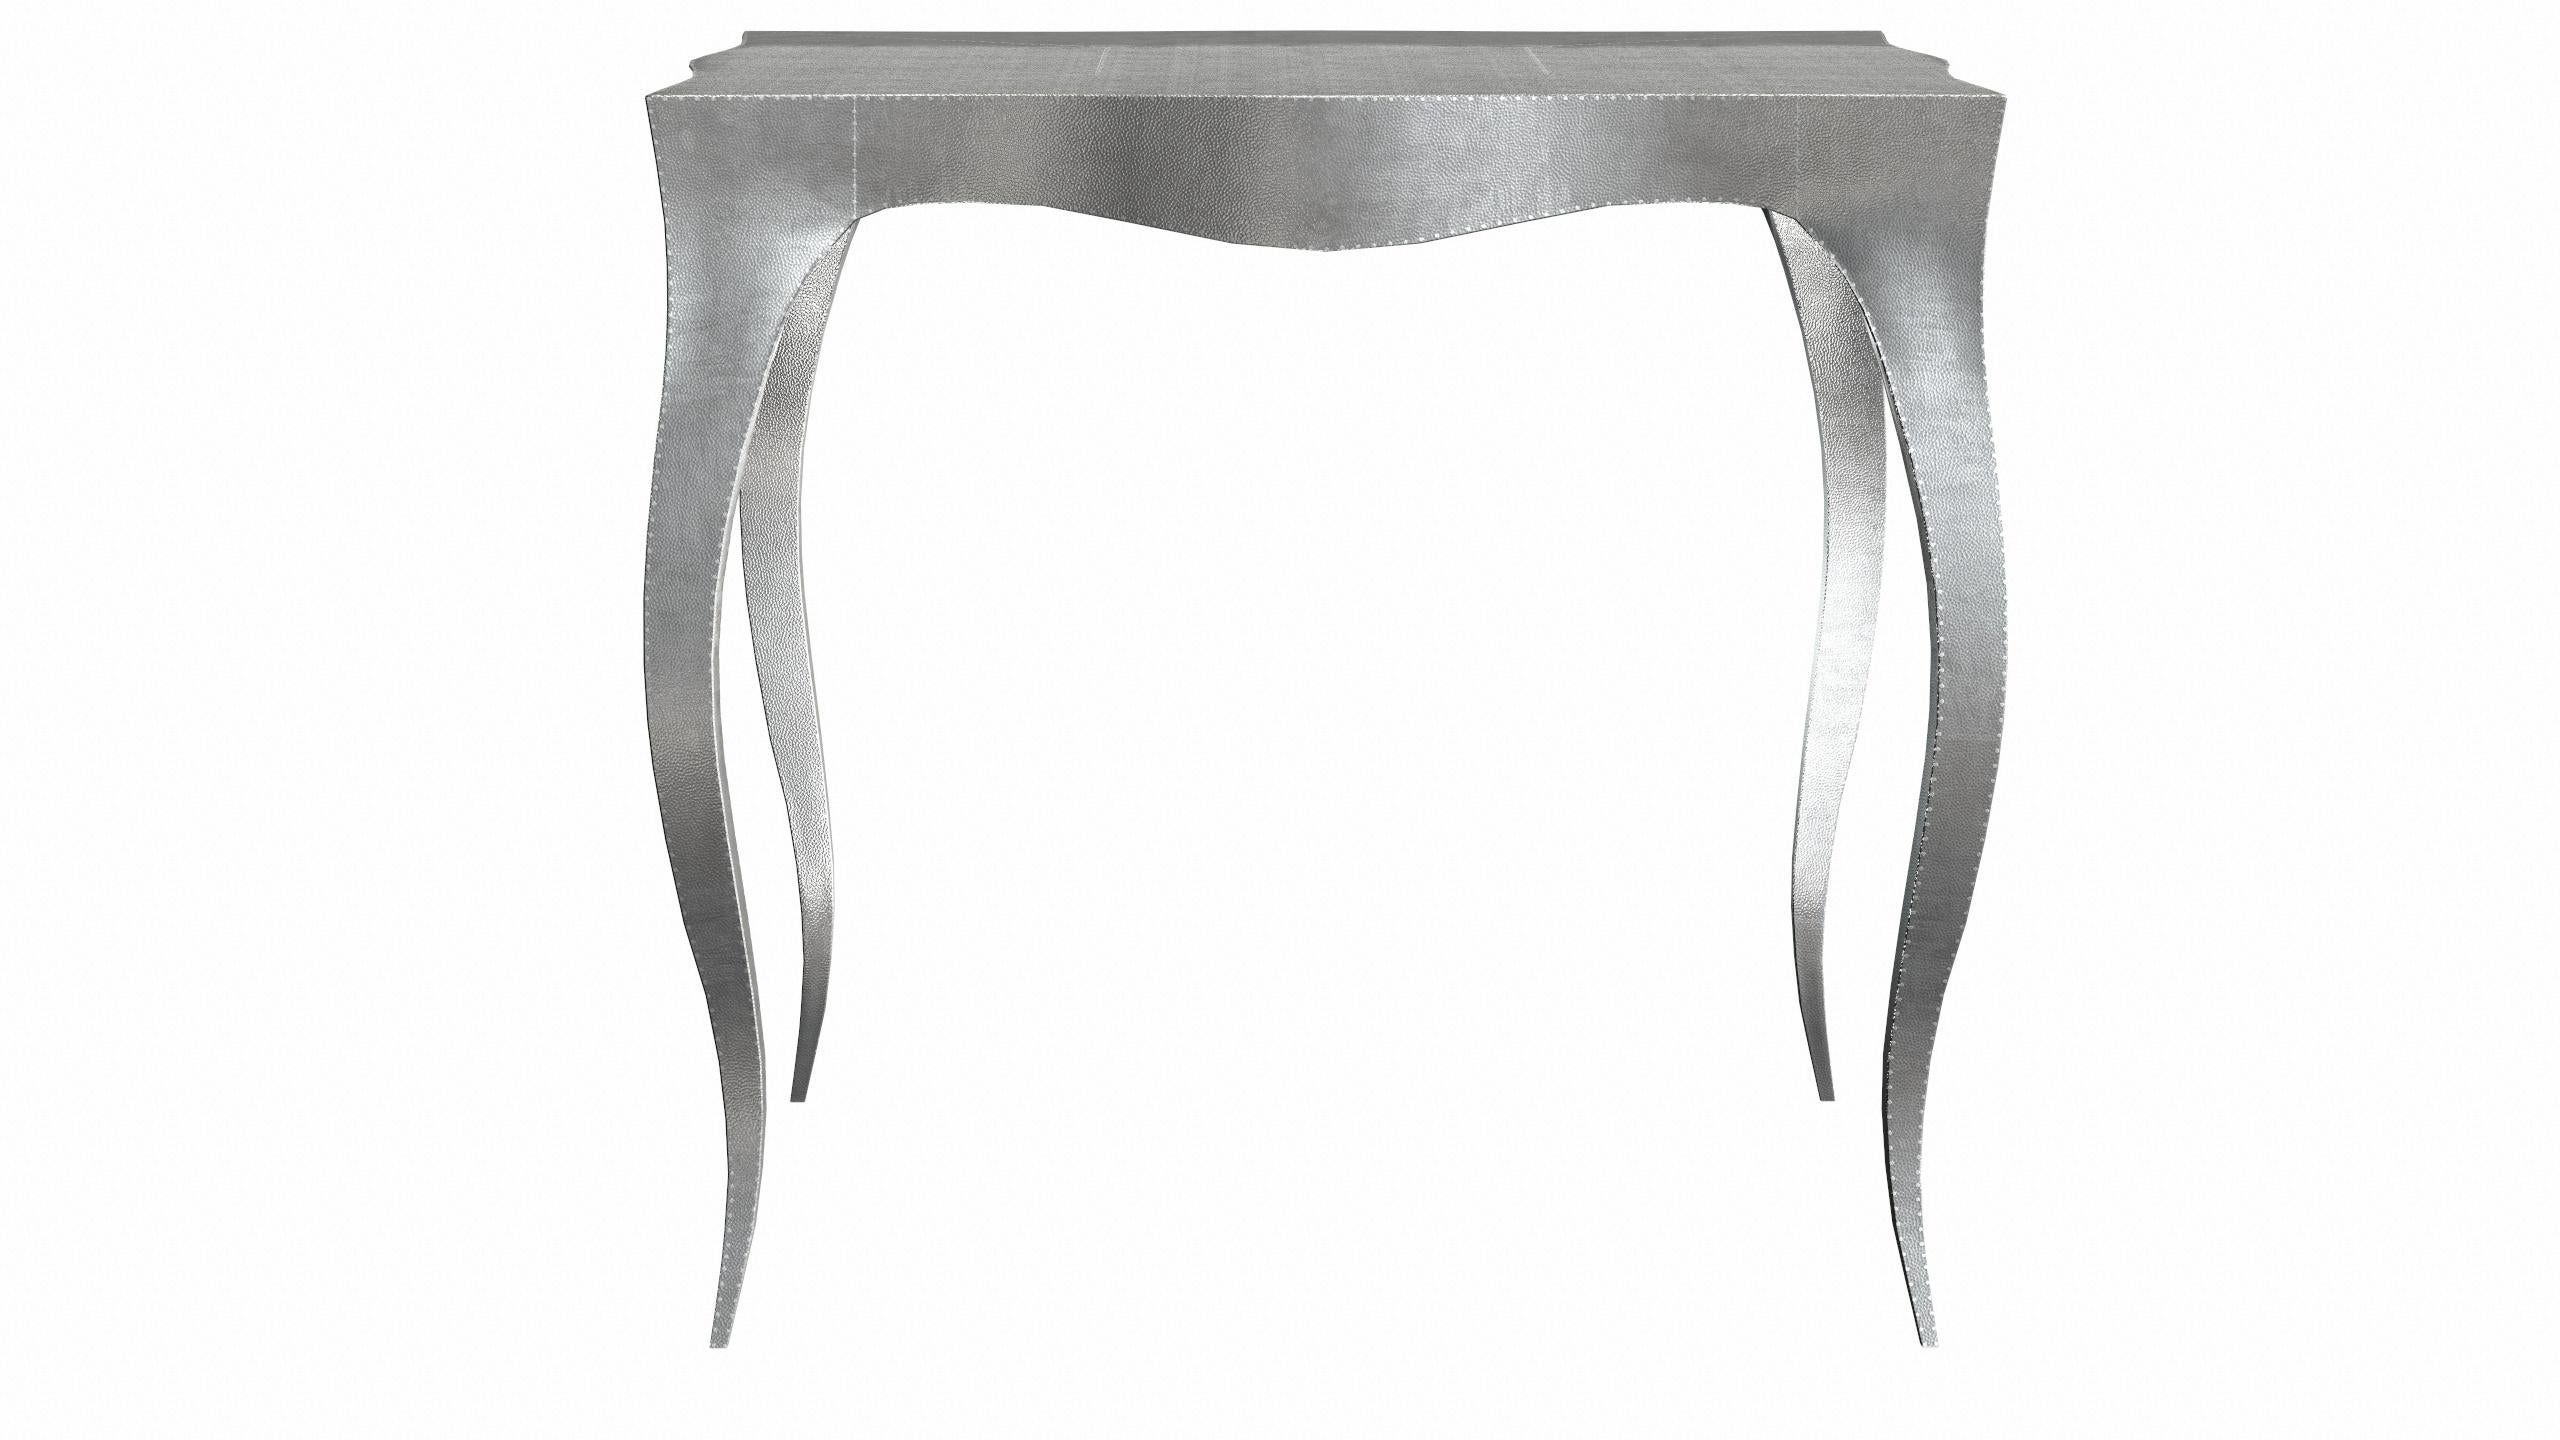 American Louise Art Deco Card and Tea Tables Mid. Hammered White Bronze by Paul Mathieu  For Sale